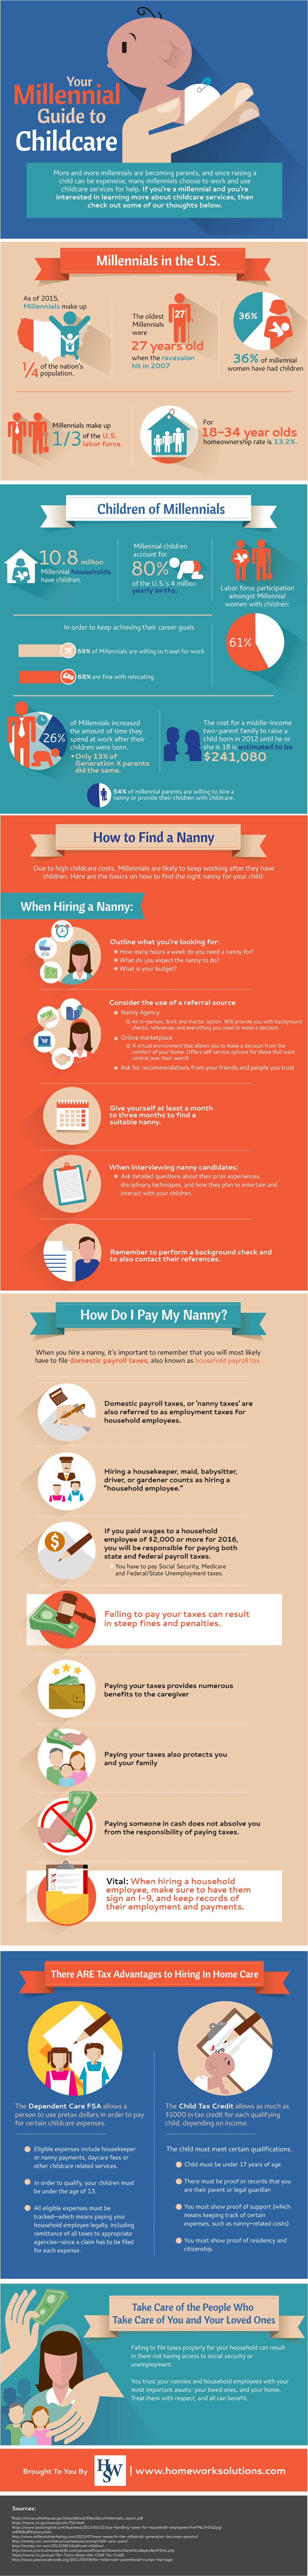 How to Help Millennial Moms [INFOGRAPHIC]